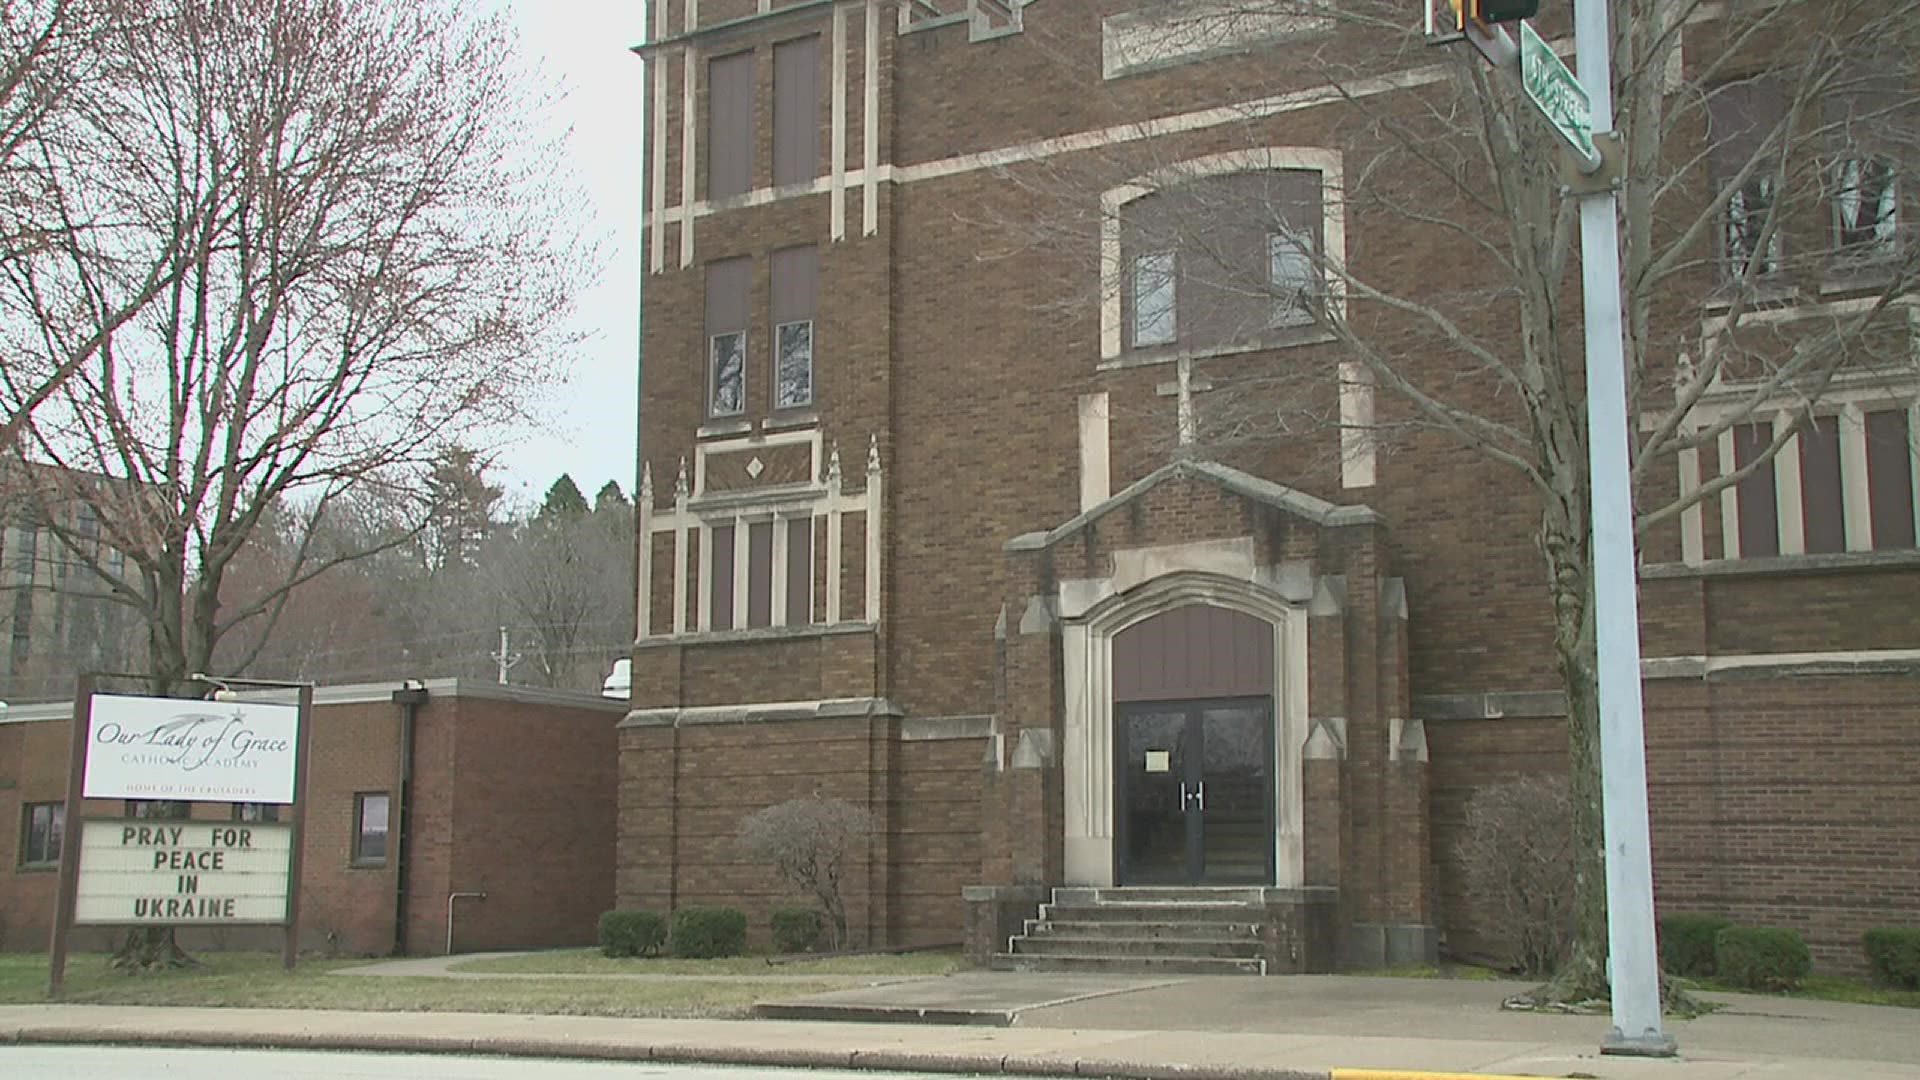 The Diocese of Peoria announced that the East Moline school will be closing this year amid a restructuring of Catholic education in Rock Island County.